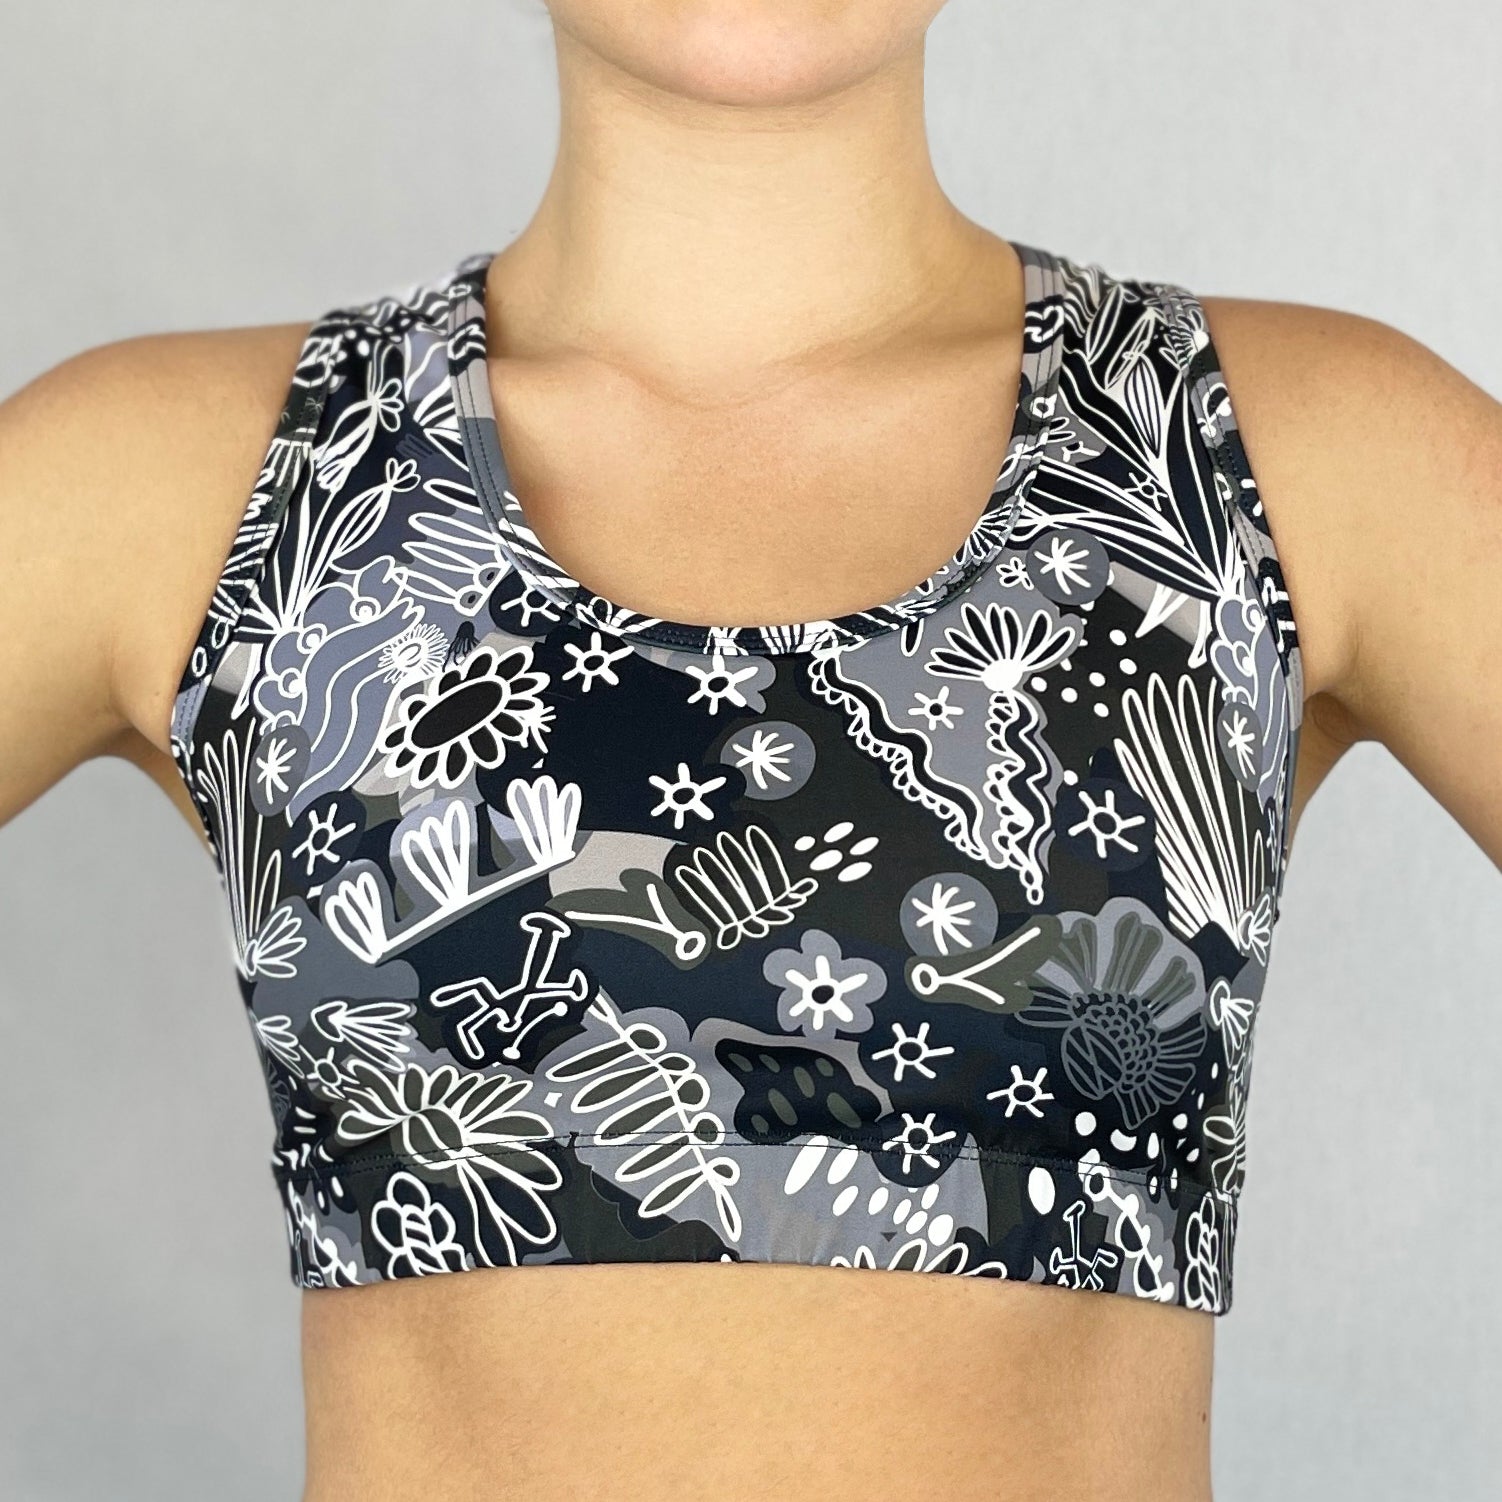 colourful sports bra made sustainably from recycled materials - black and white coral front